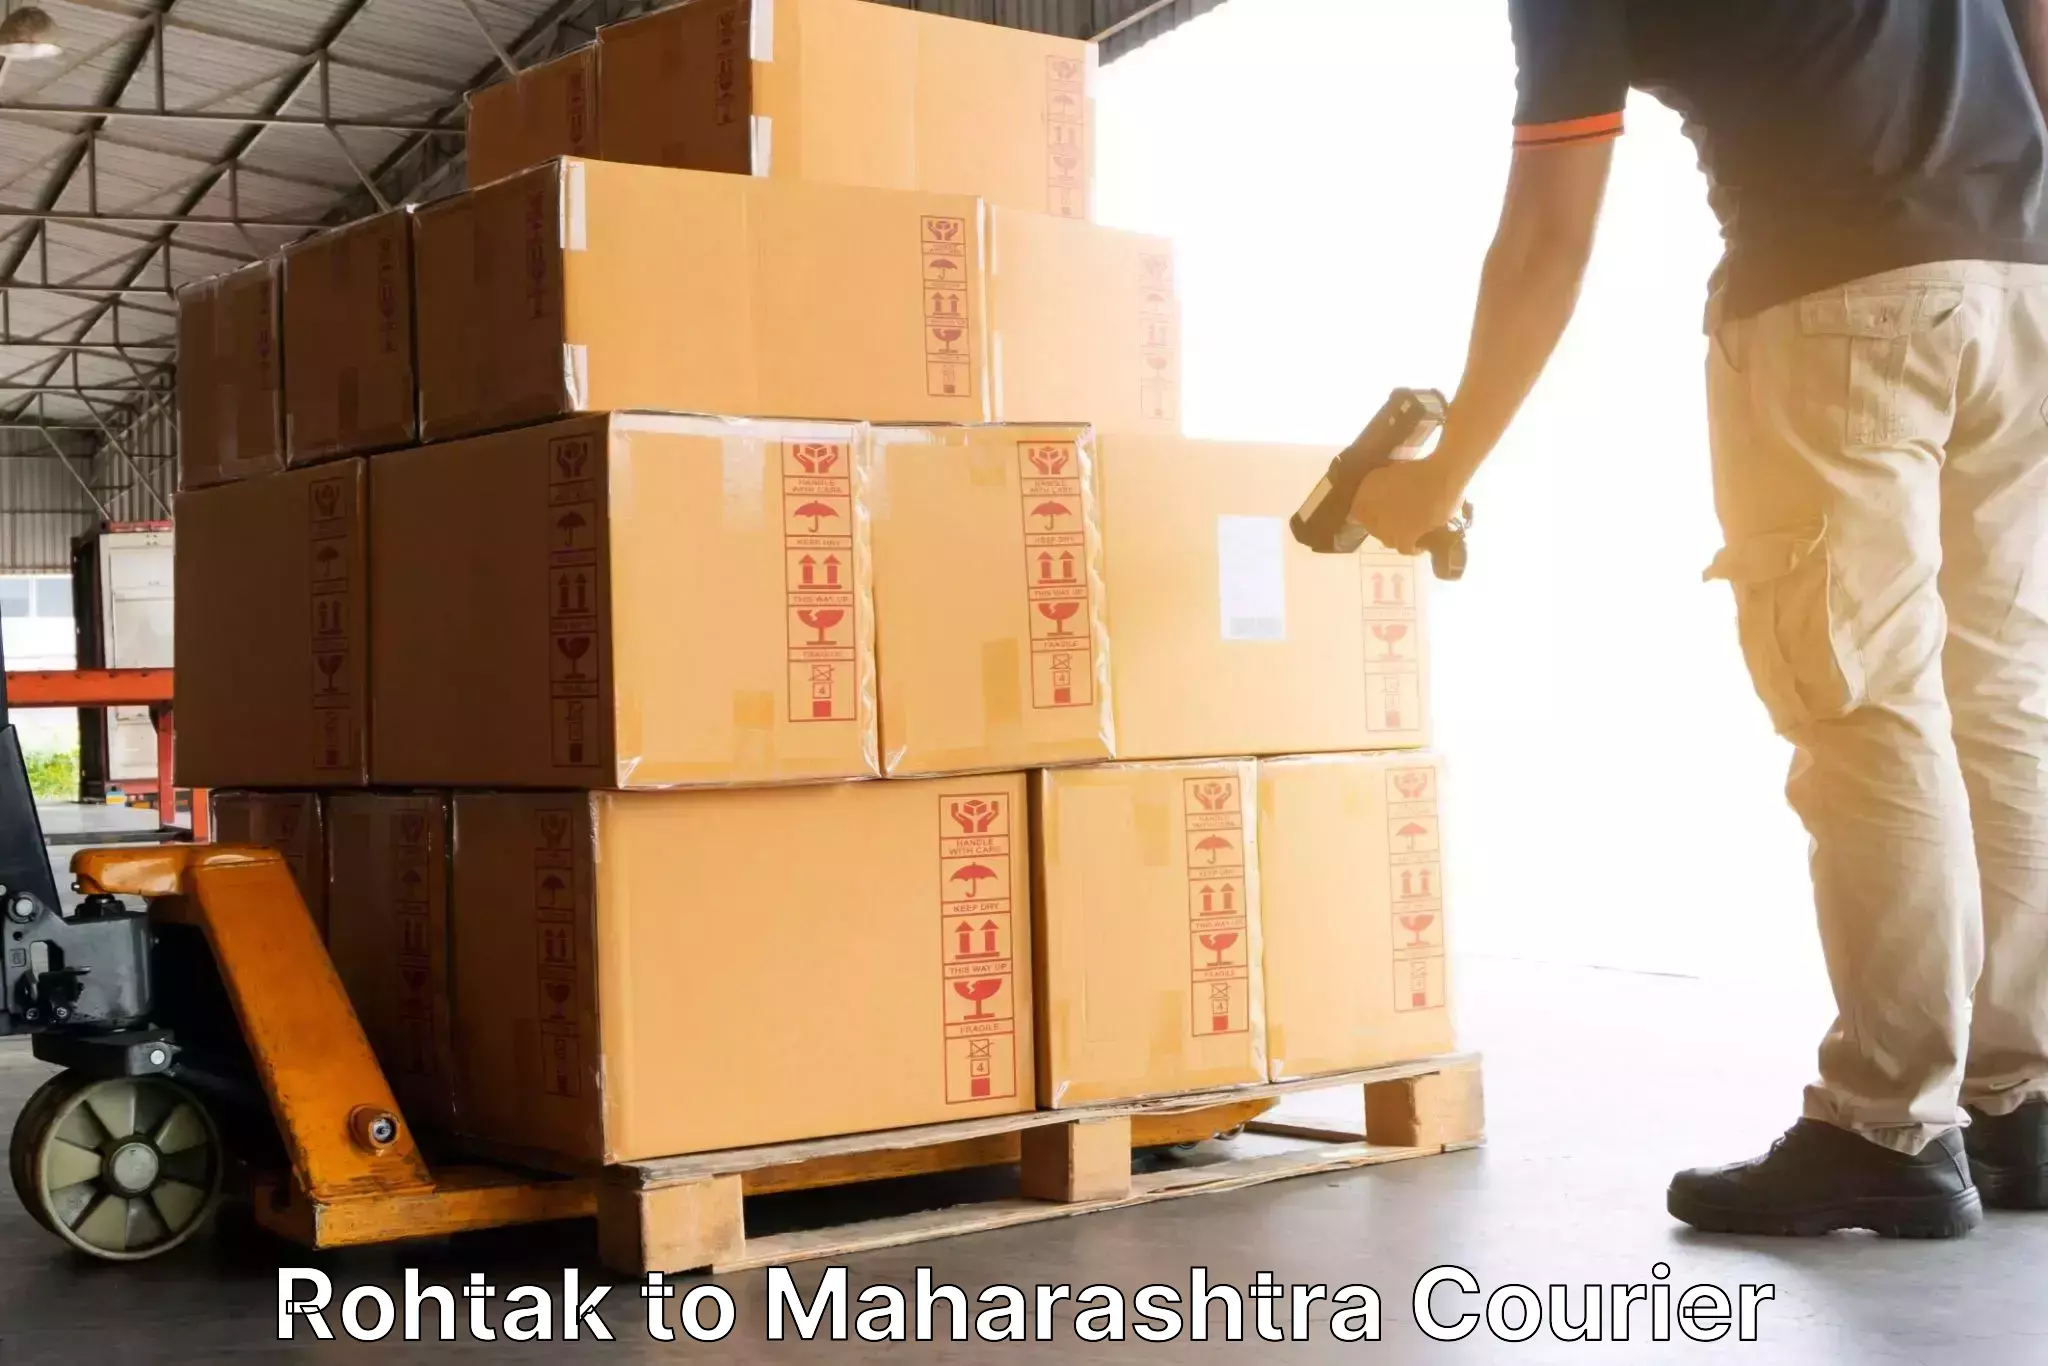 Multi-national courier services Rohtak to Bhokar